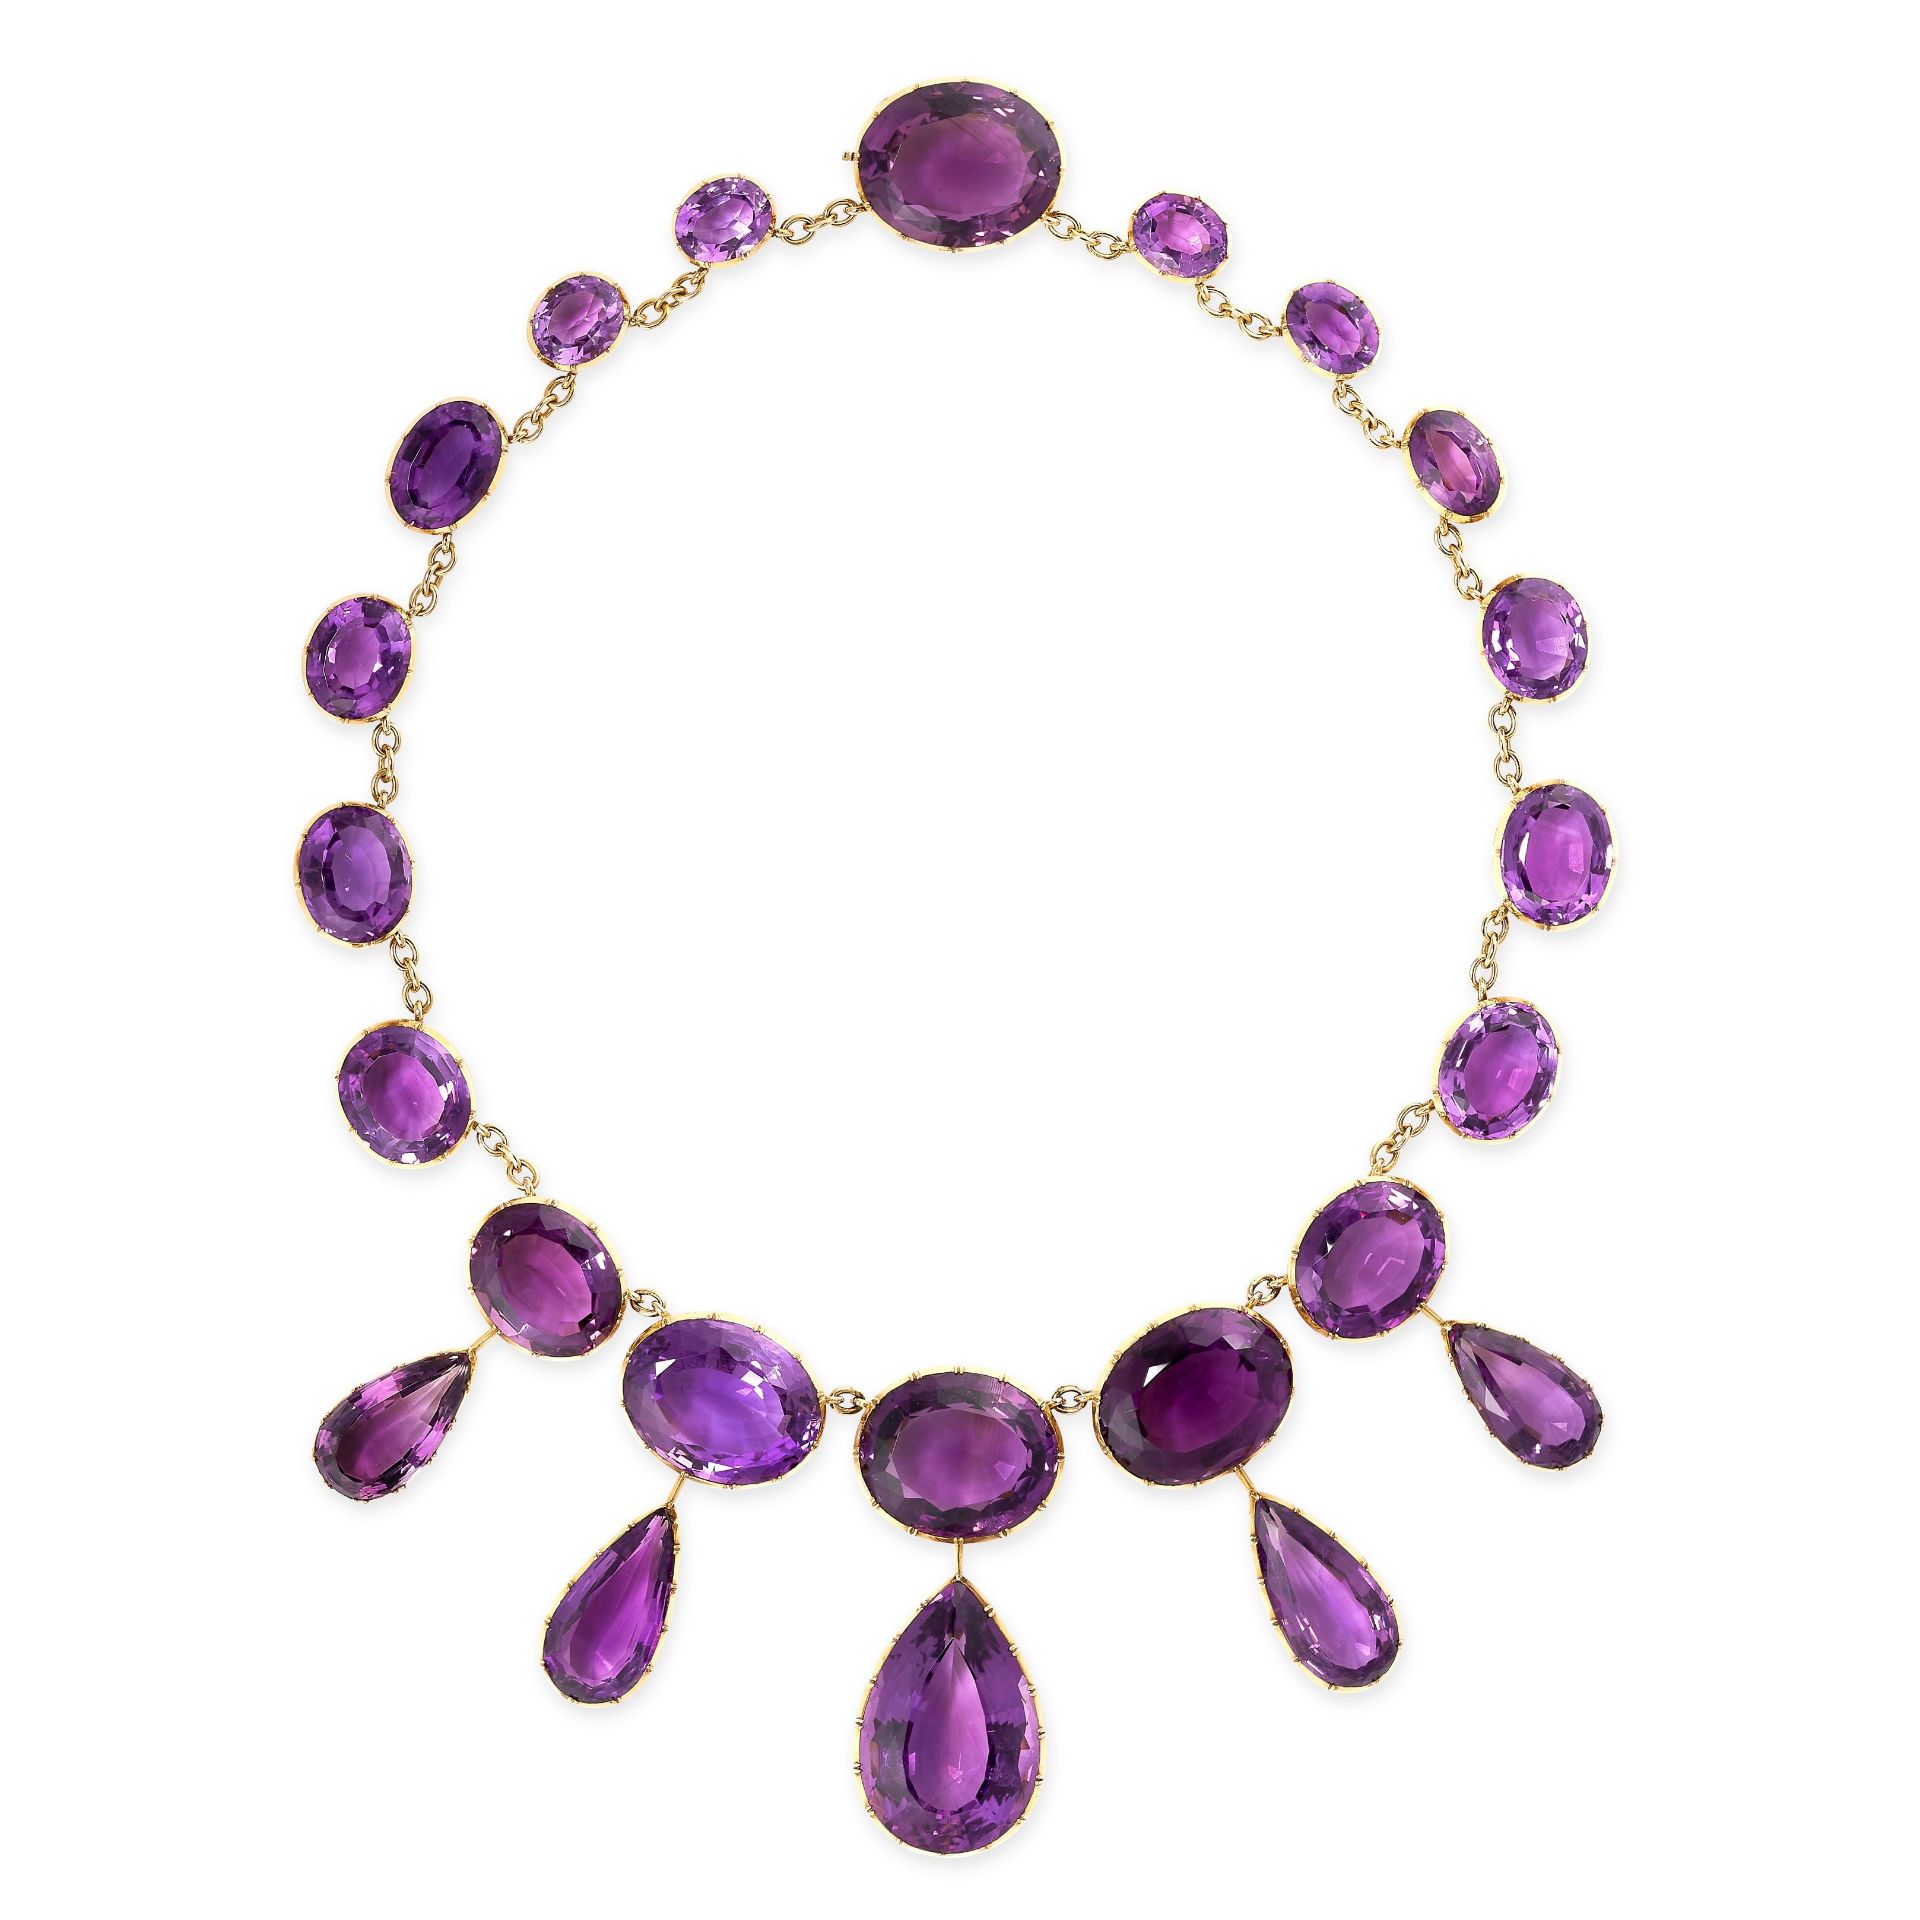 A SENSATIONAL ANTIQUE AMETHYST RIVIERE NECKLACE, CIRCA 1875 in yellow gold, comprising a row of